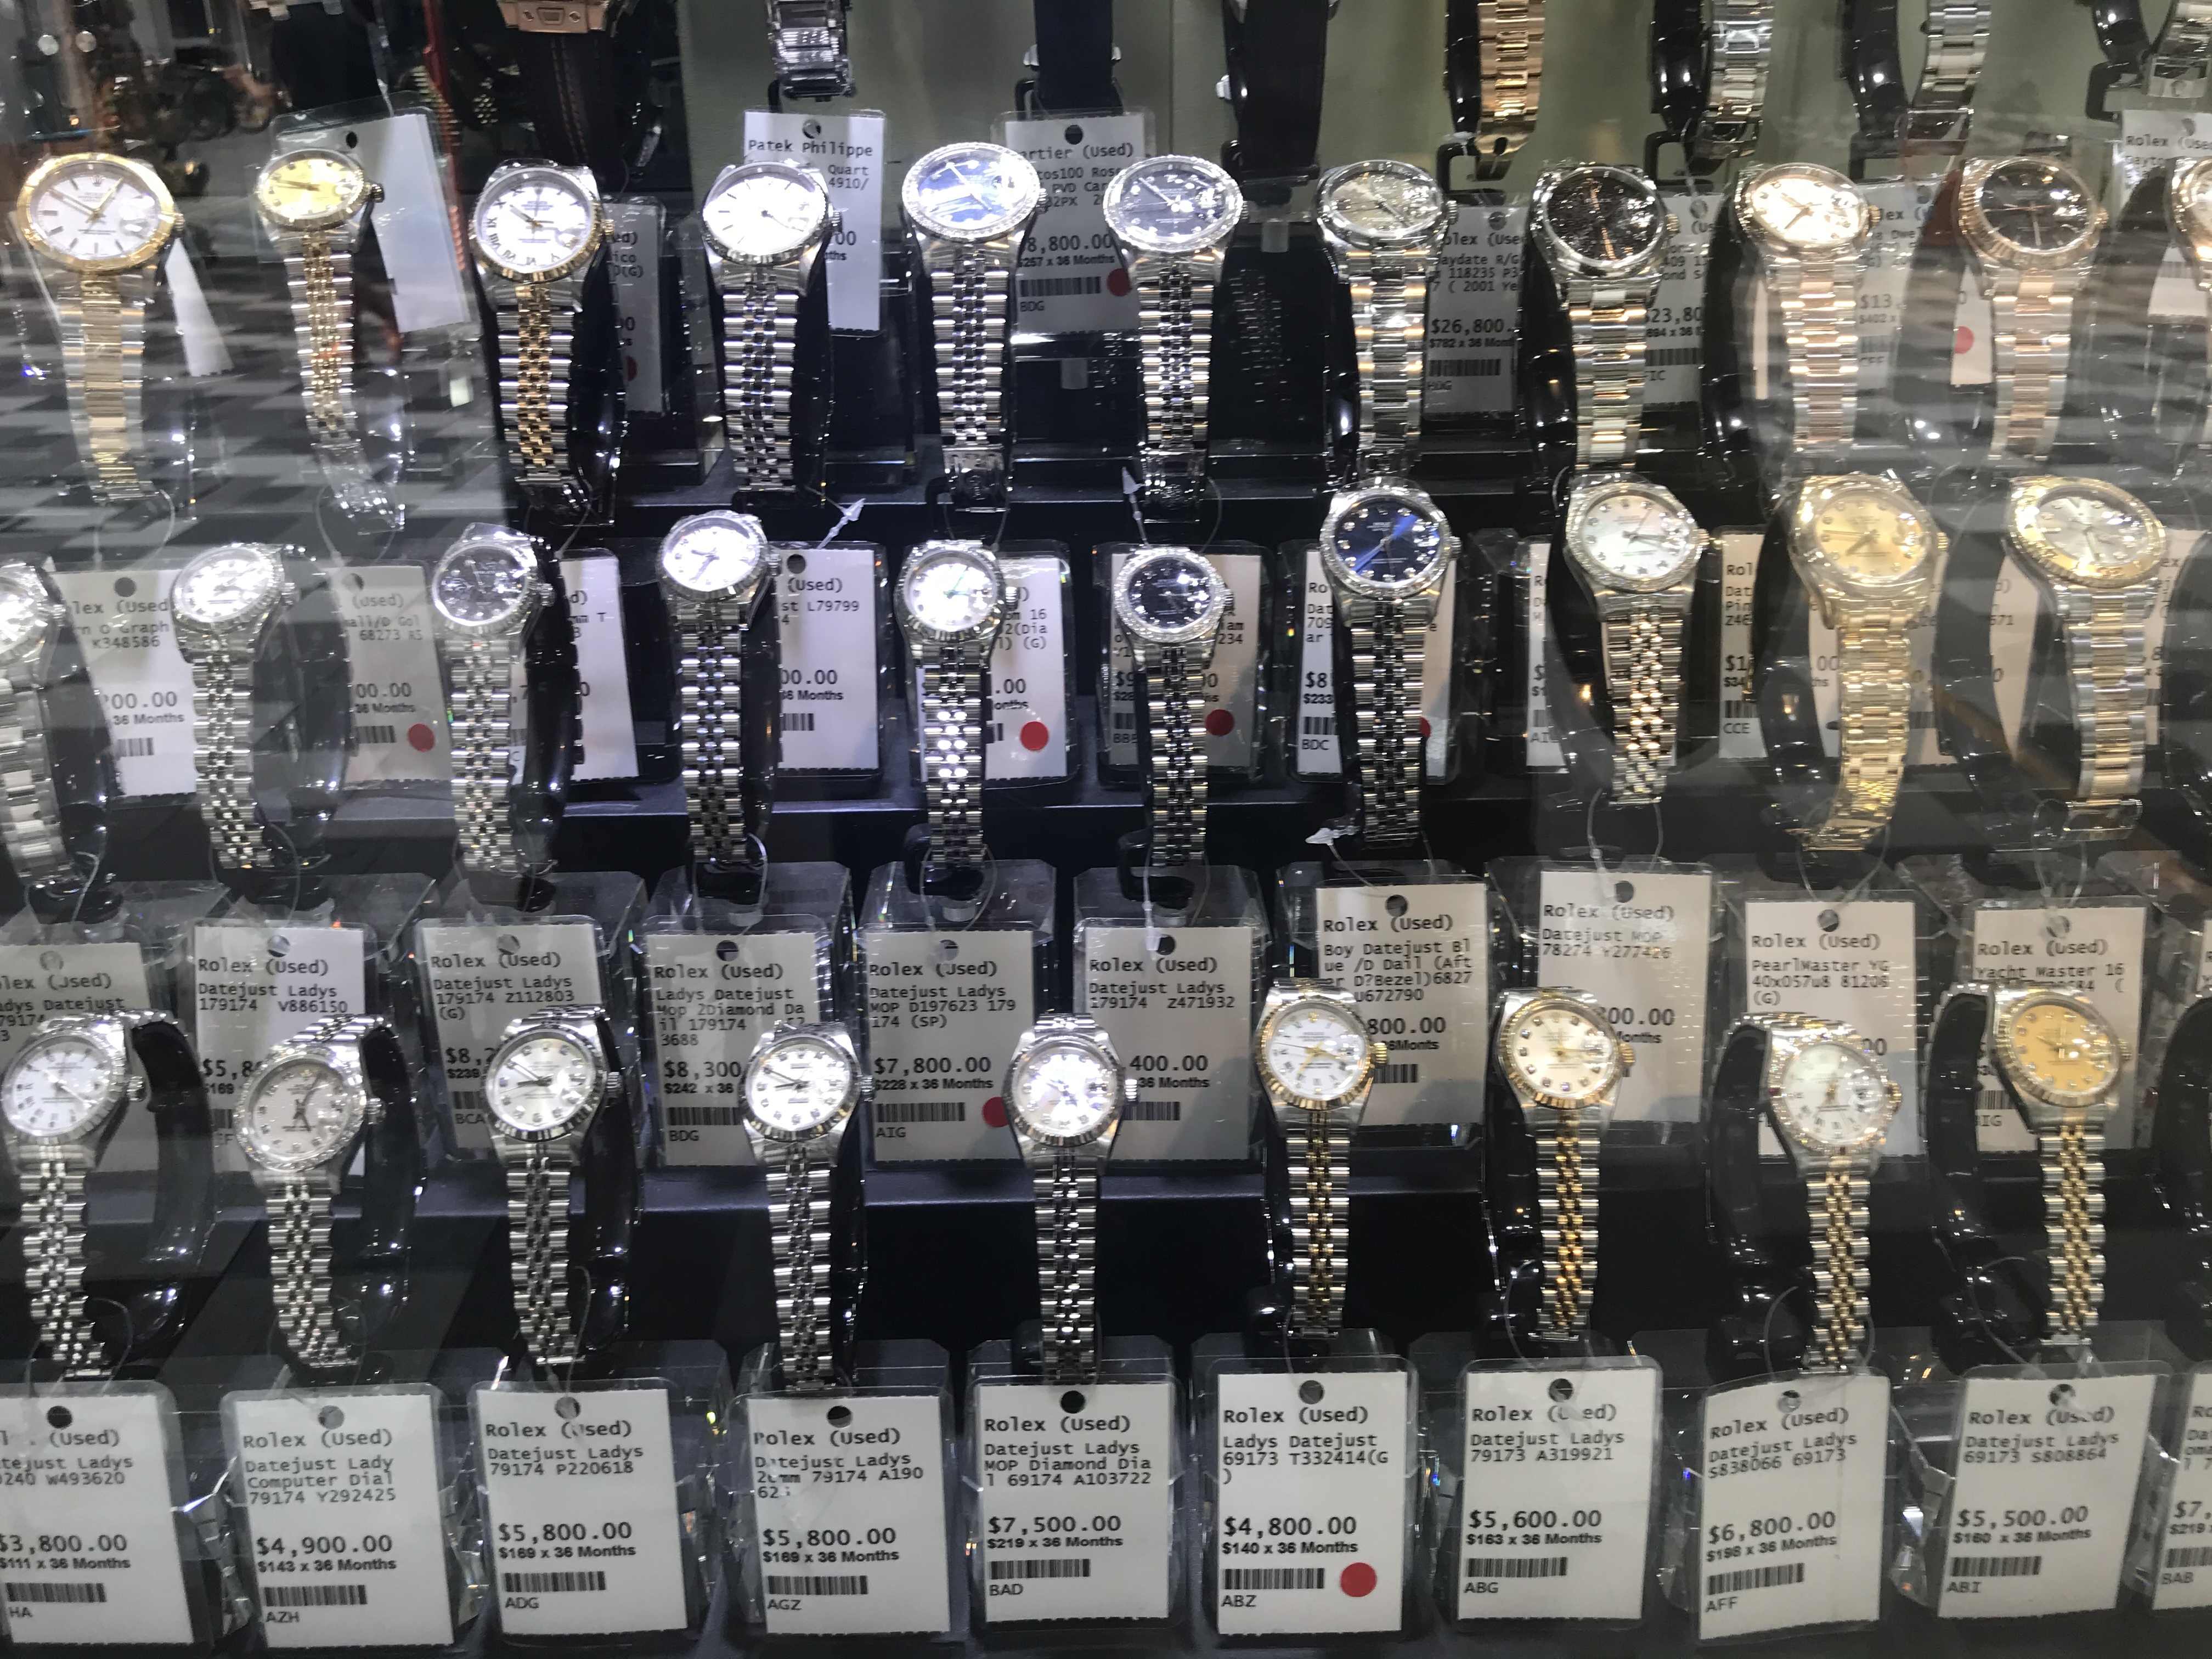 Shop in Bedok sells new and pre-owned Rolex watches from $2.8K - 3